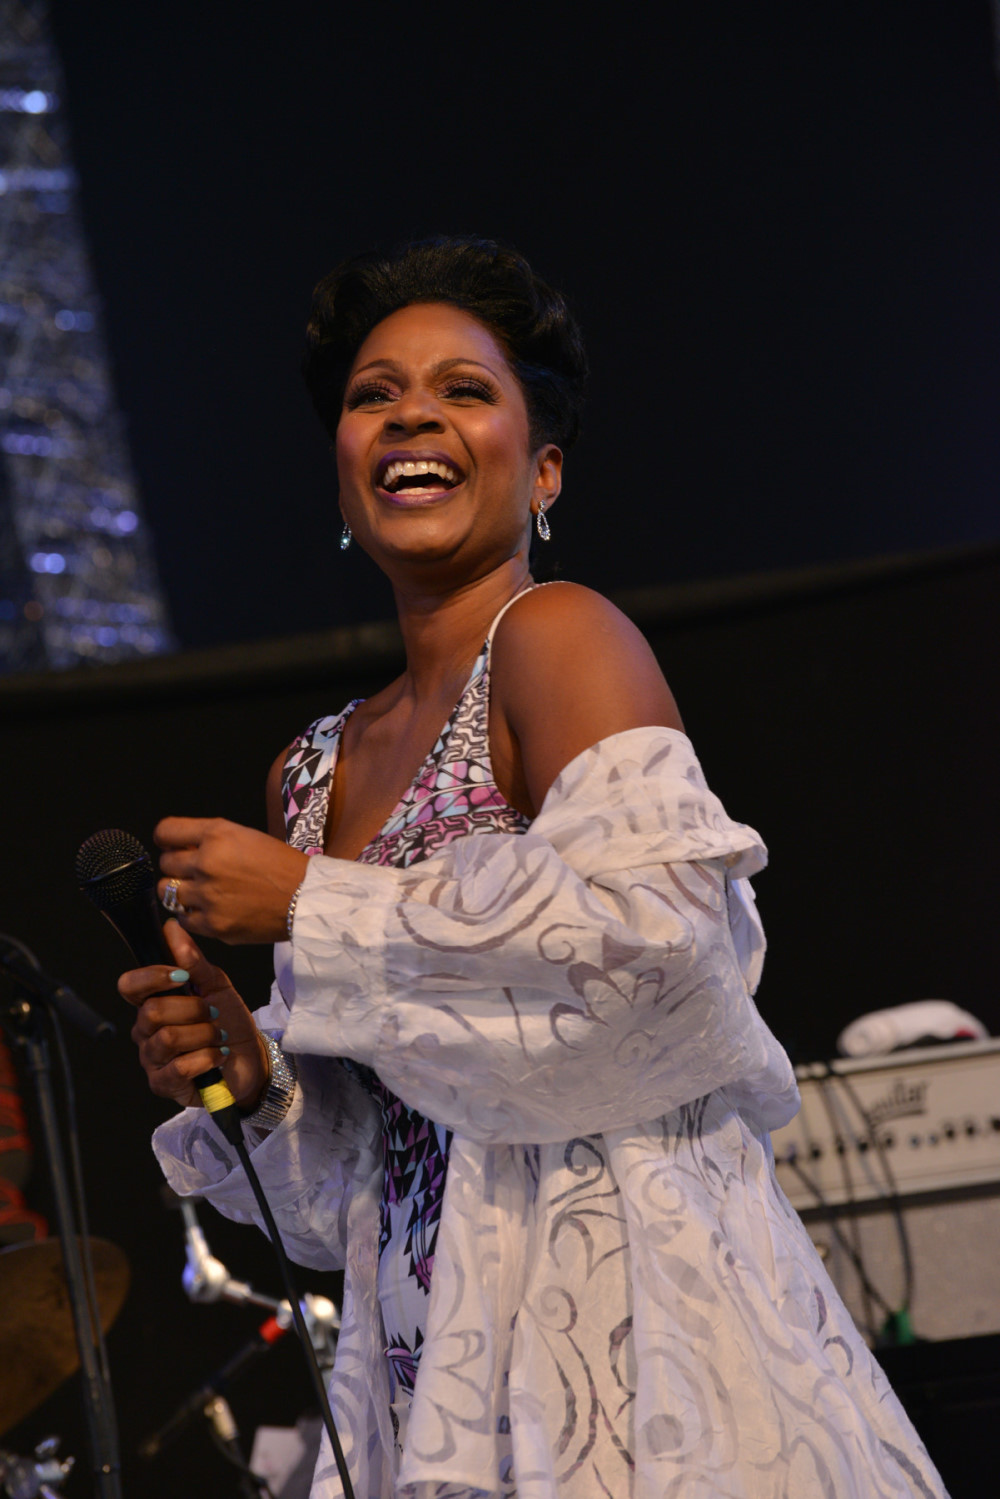 NEW ORLEANS GREAT STEPHANIE JORDAN IS PROUD TO JOIN THE AUDIX FAMILY. “I LIKE THIS MICROPHONE”